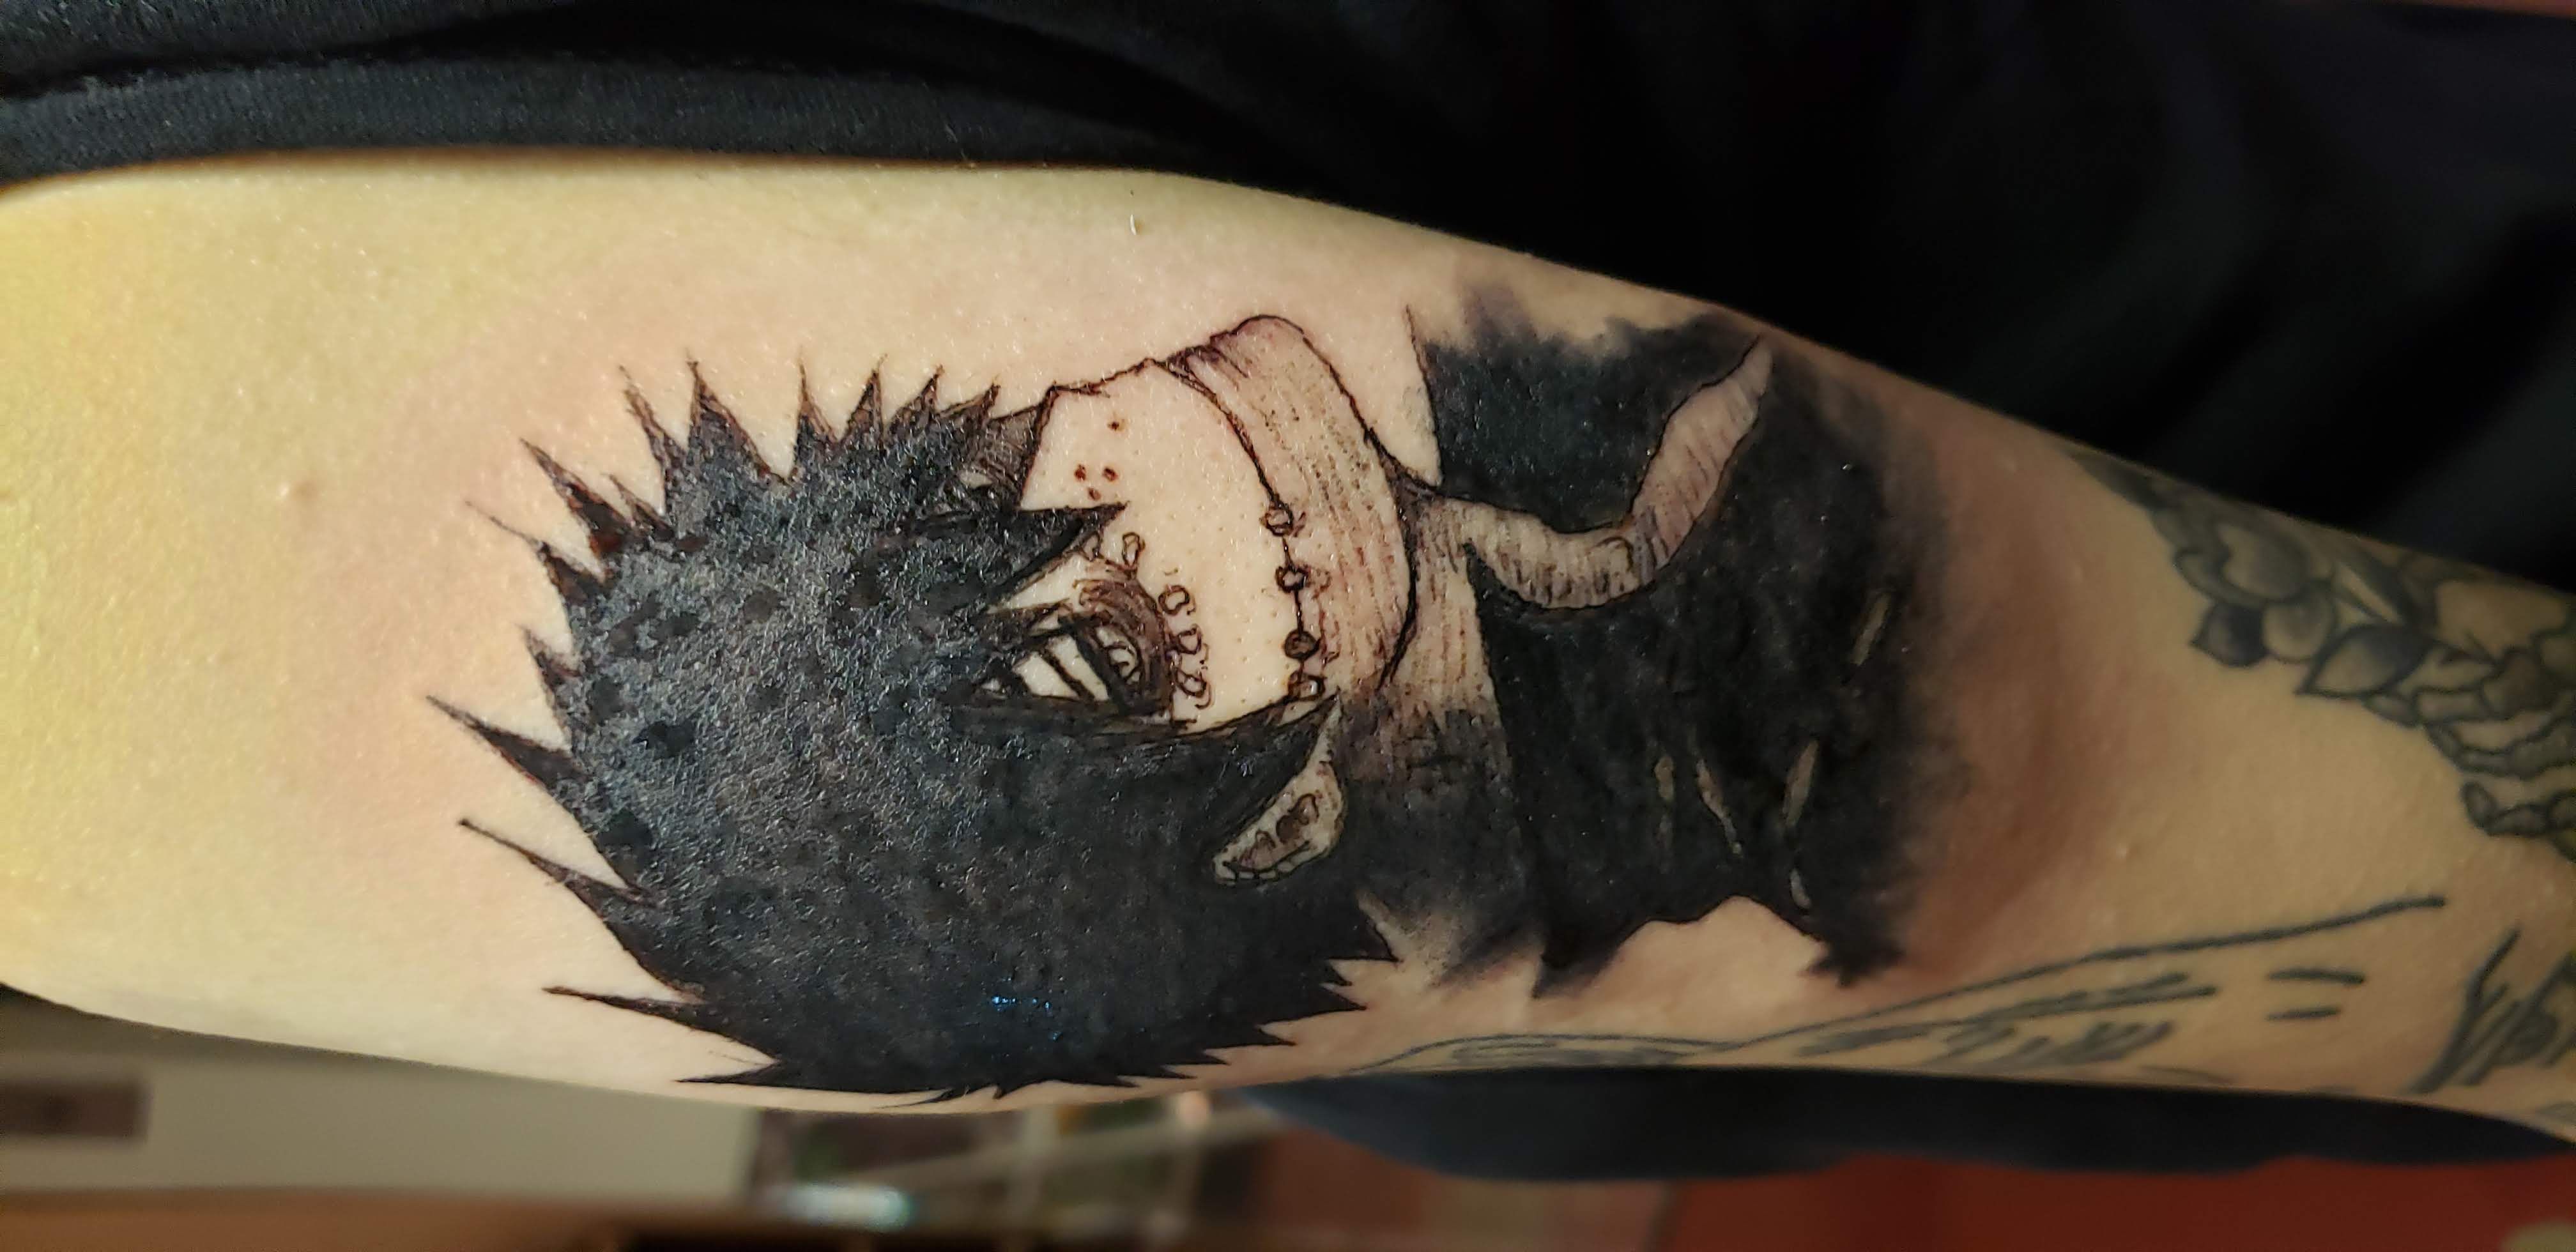 My Hero Academia tattoo I have a lot  Belle Noire Tattoo  Facebook